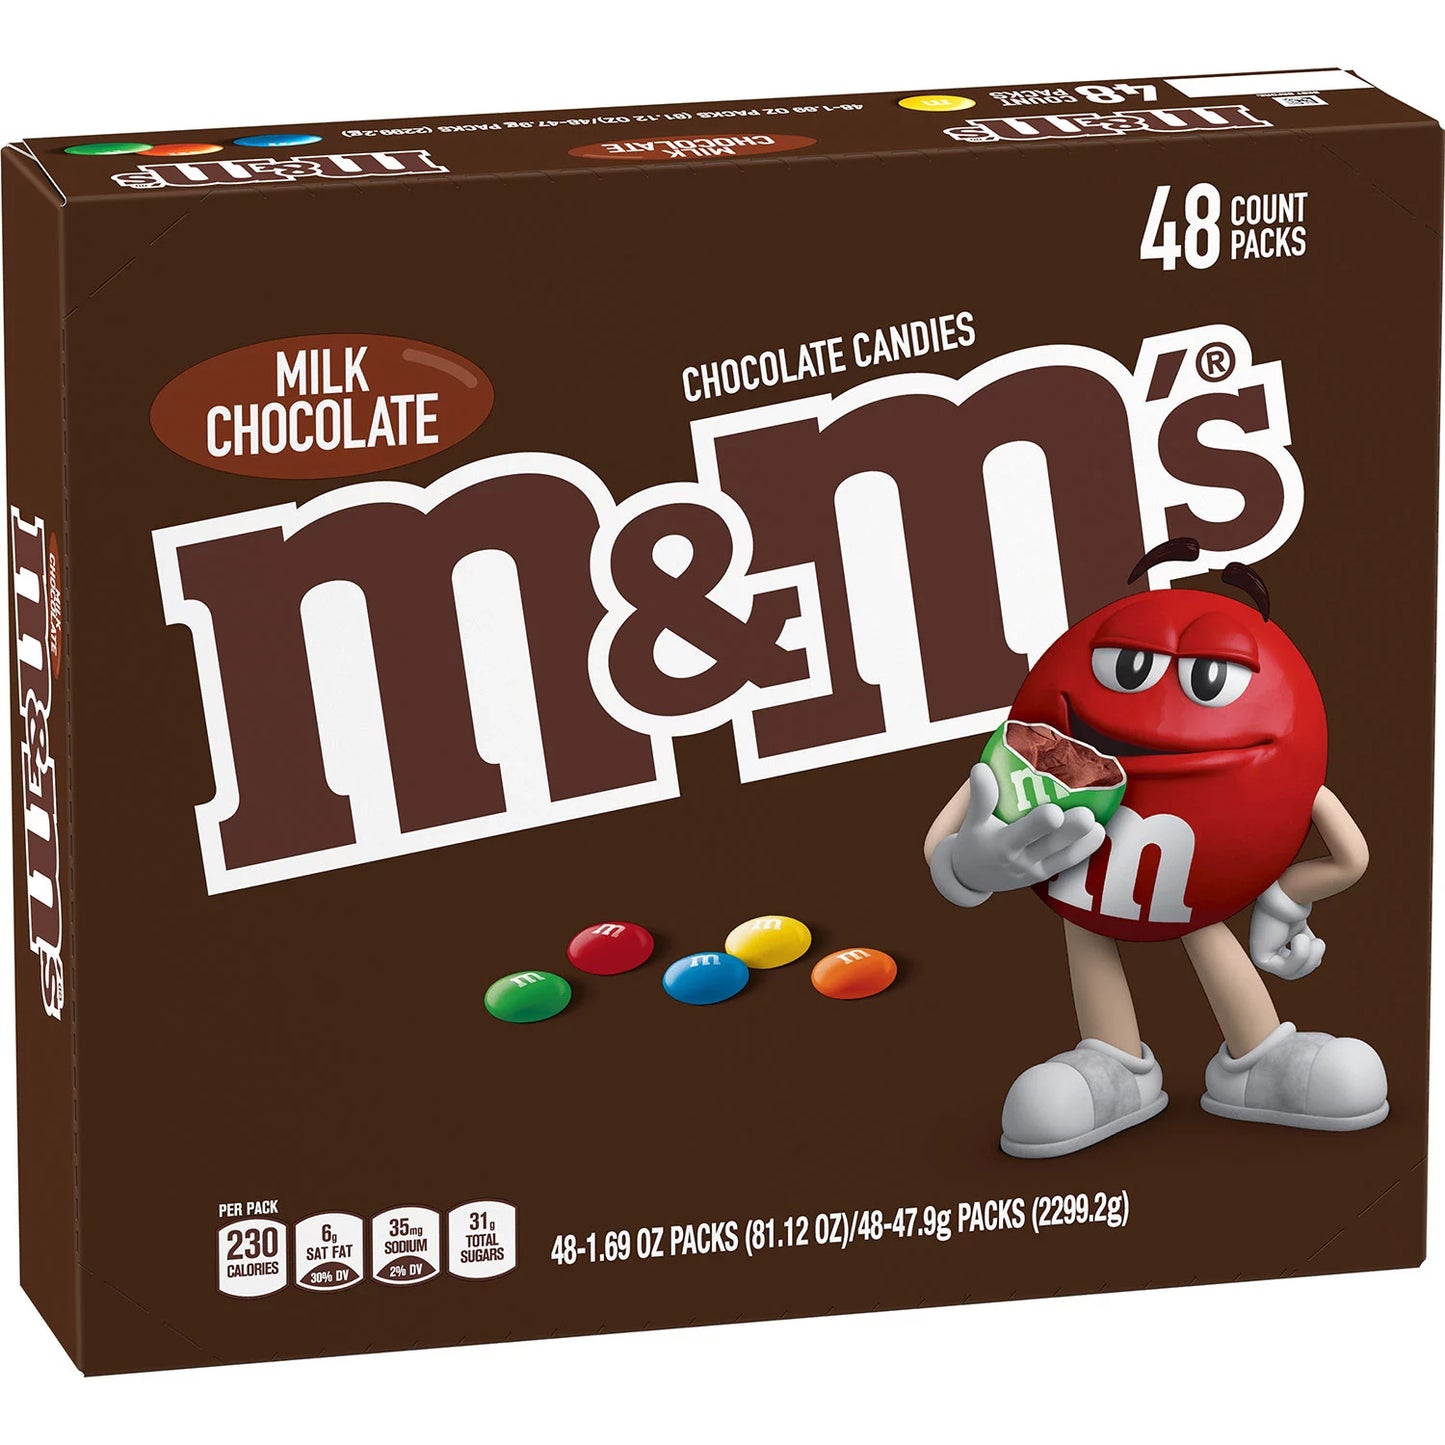 M&M's Milk Chocolate Candy, Full Size, 1.69 oz, 48-count